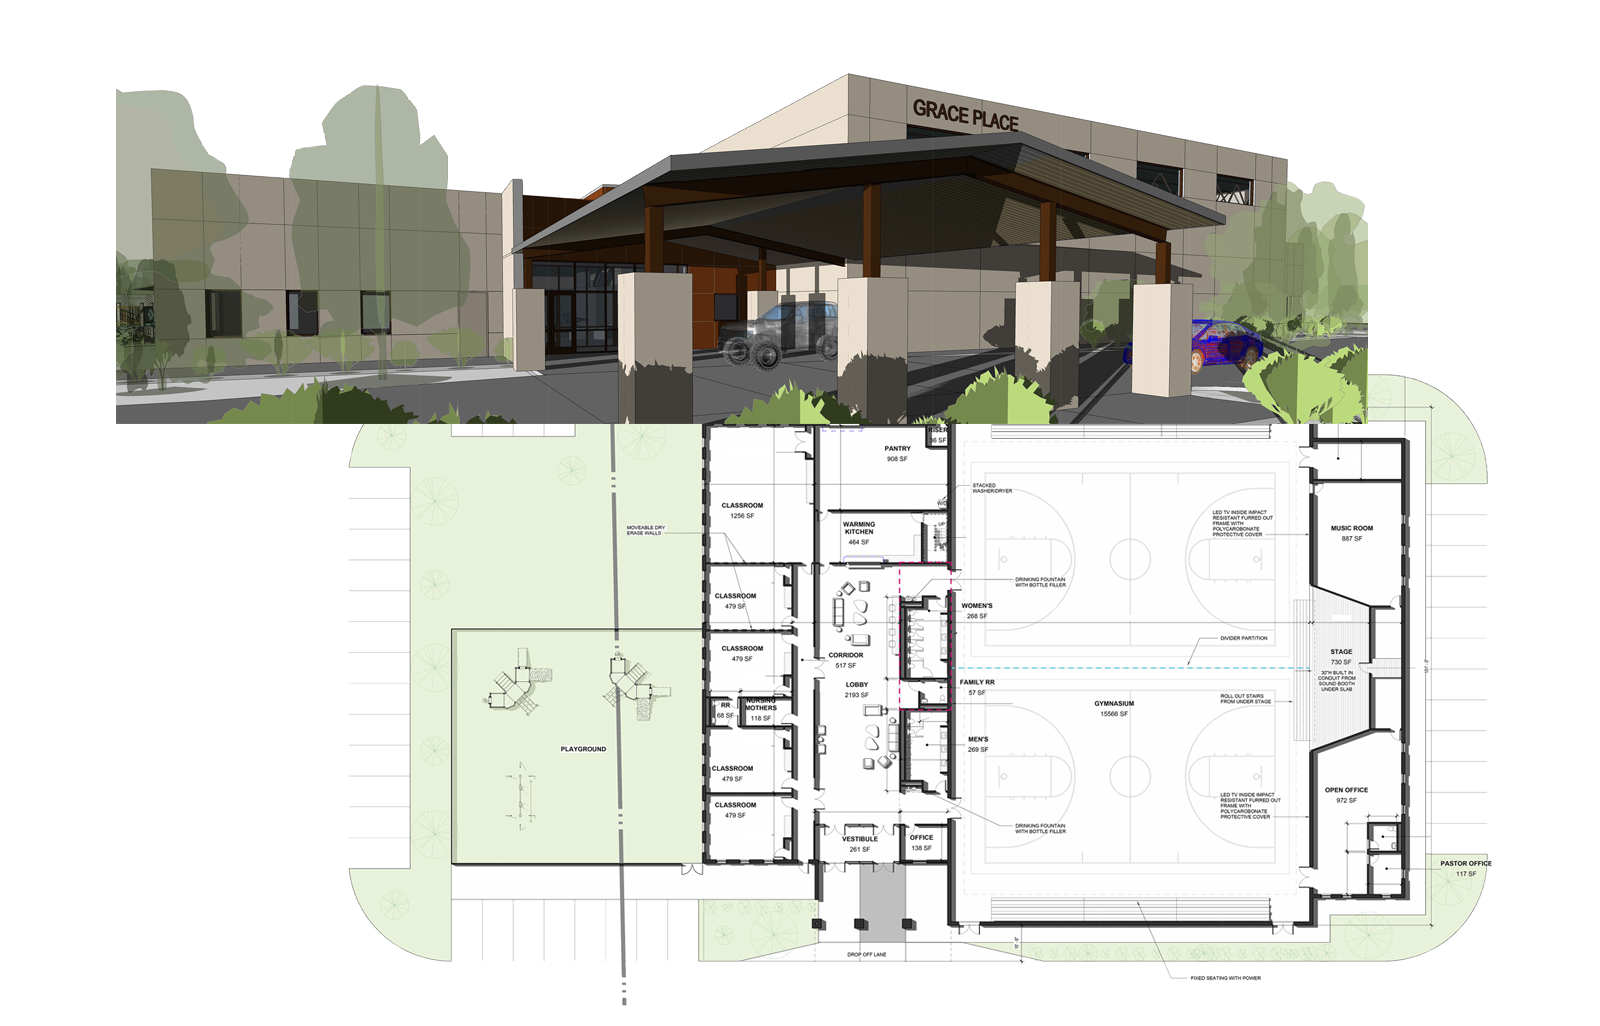 Combined image of Grace Place Community Center floor plan and rendering of front of building